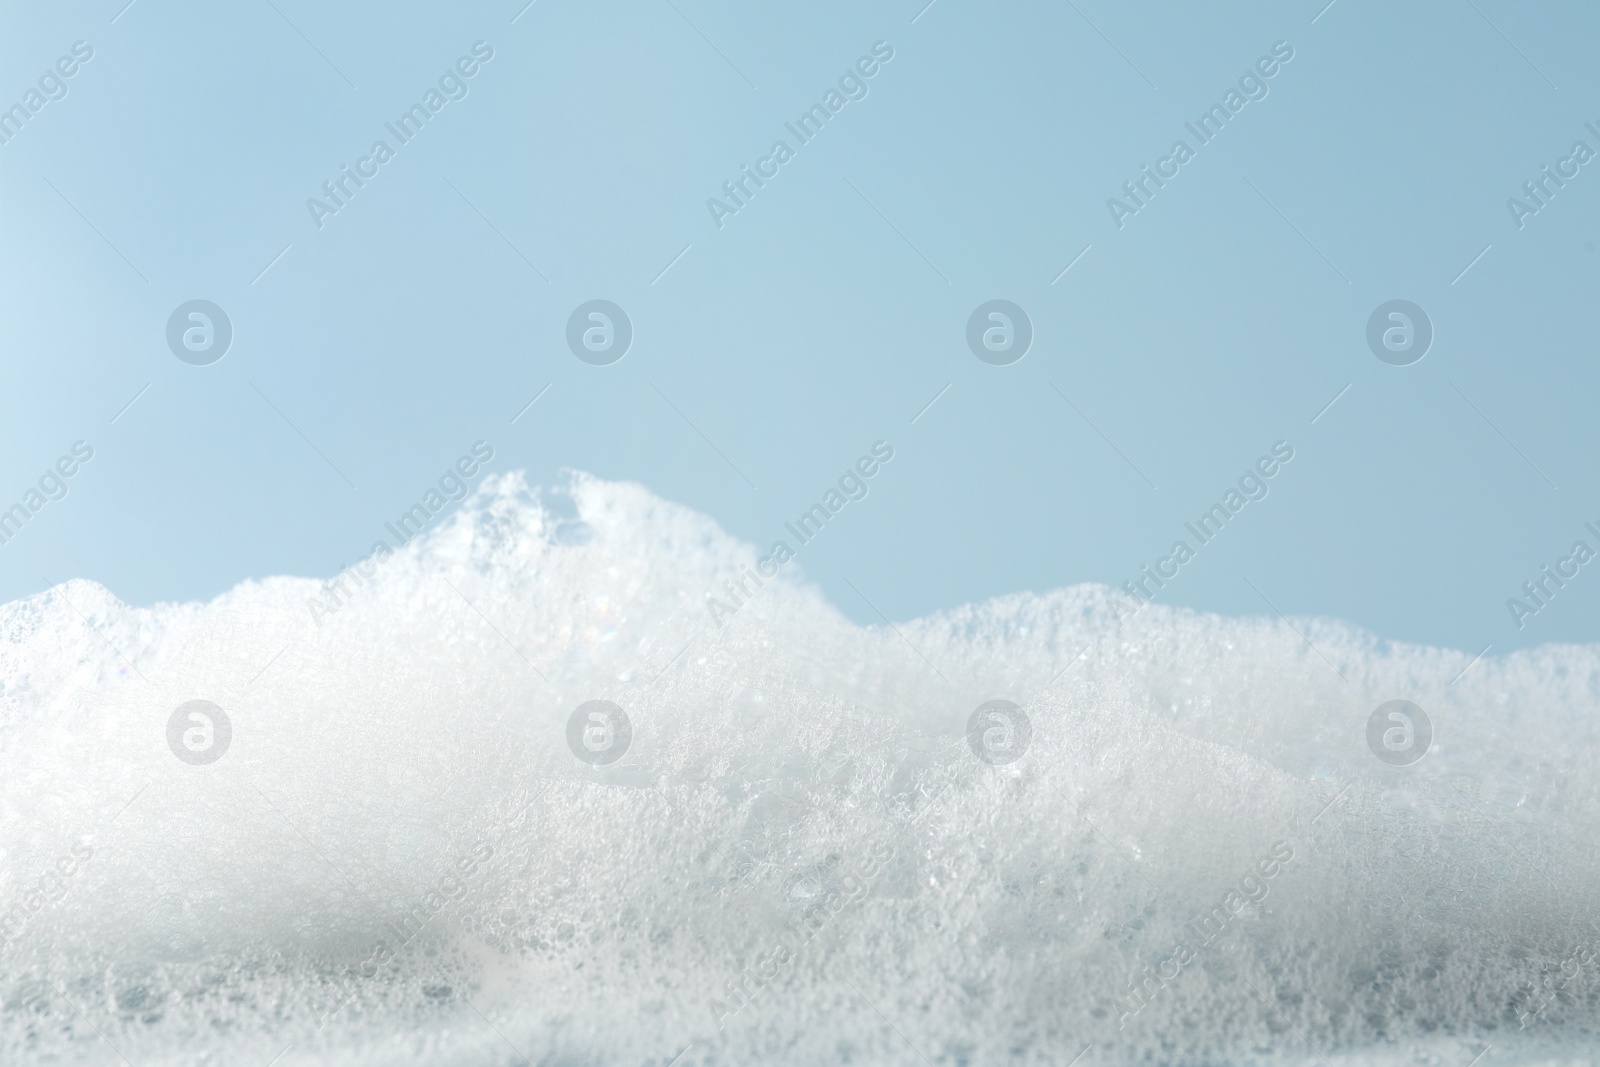 Photo of Fluffy bath foam on light blue background, closeup. Space for text